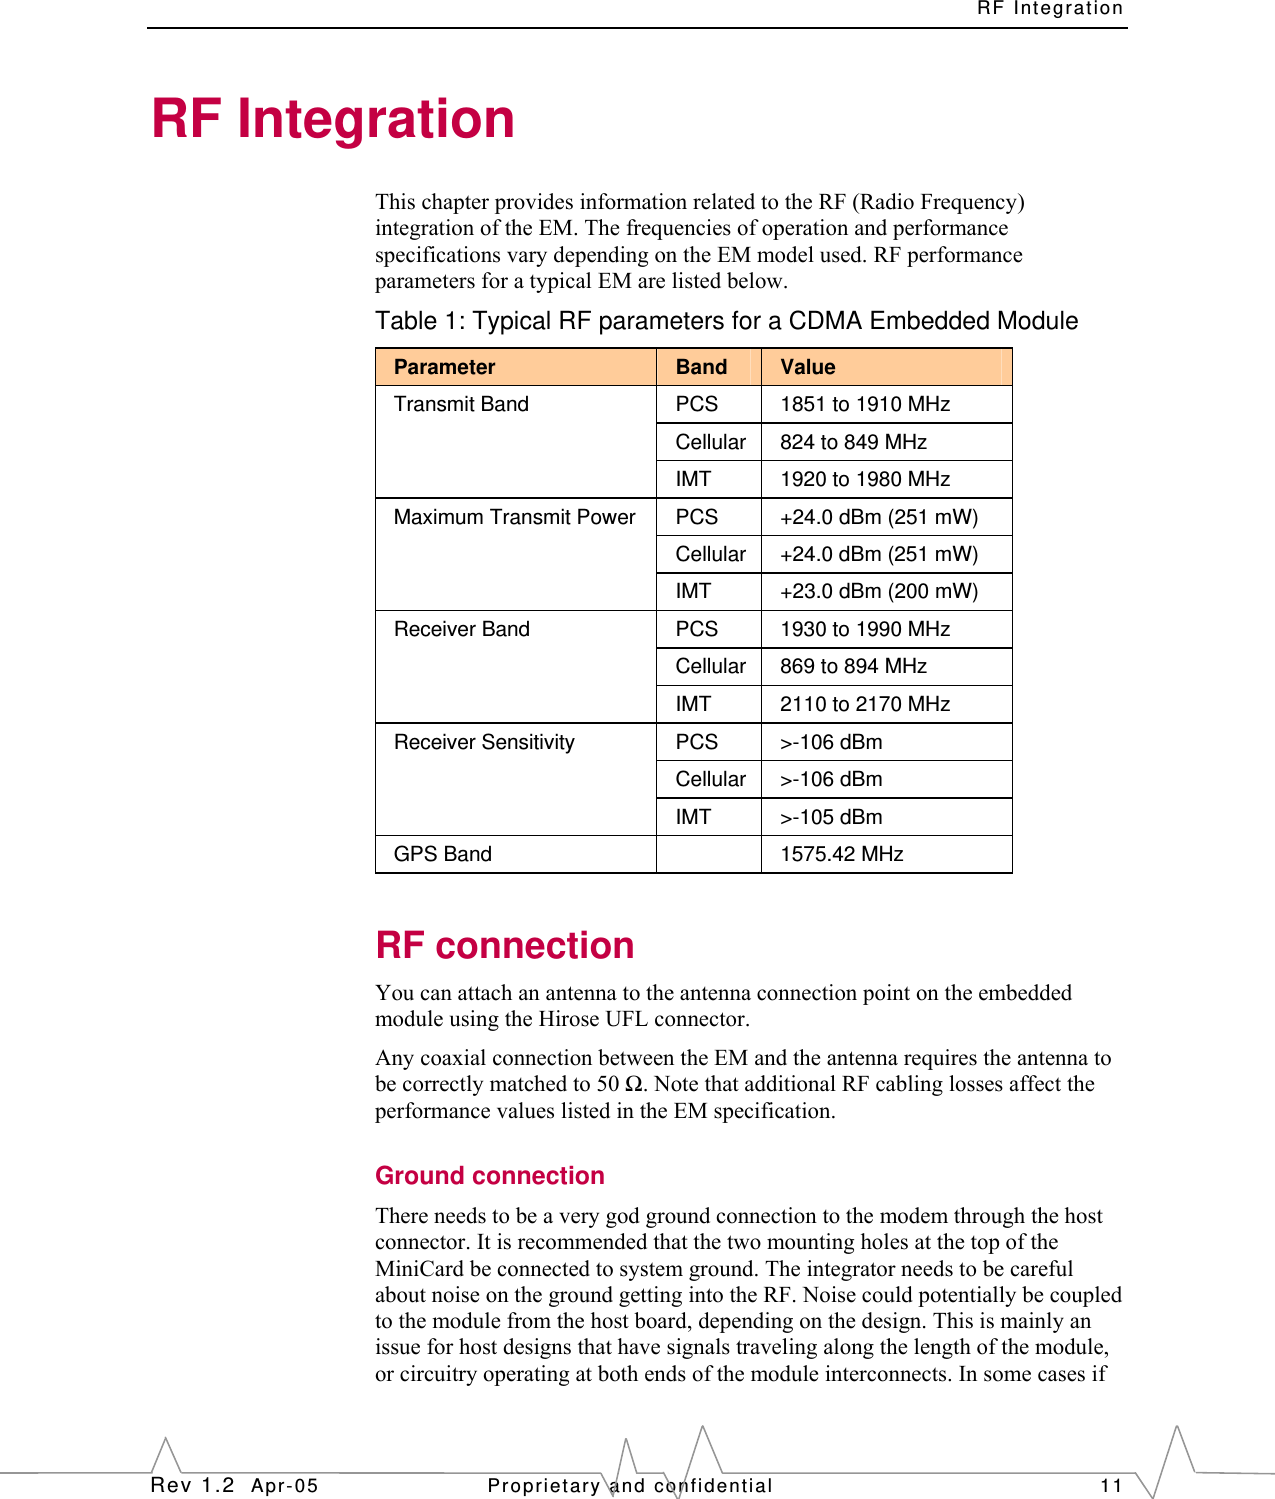 RF Integration Rev 1.2  Apr-05   Proprietary and confidential   11 RF Integration This chapter provides information related to the RF (Radio Frequency) integration of the EM. The frequencies of operation and performance specifications vary depending on the EM model used. RF performance parameters for a typical EM are listed below. Table 1: Typical RF parameters for a CDMA Embedded Module Parameter  Band  Value PCS  1851 to 1910 MHz Cellular  824 to 849 MHz Transmit Band IMT  1920 to 1980 MHz PCS  +24.0 dBm (251 mW) Cellular  +24.0 dBm (251 mW) Maximum Transmit Power IMT  +23.0 dBm (200 mW) PCS  1930 to 1990 MHz Cellular  869 to 894 MHz Receiver Band IMT  2110 to 2170 MHz PCS &gt;-106 dBm Cellular &gt;-106 dBm Receiver Sensitivity IMT &gt;-105 dBm GPS Band    1575.42 MHz RF connection You can attach an antenna to the antenna connection point on the embedded module using the Hirose UFL connector. Any coaxial connection between the EM and the antenna requires the antenna to be correctly matched to 50 Ω. Note that additional RF cabling losses affect the performance values listed in the EM specification. Ground connection There needs to be a very god ground connection to the modem through the host connector. It is recommended that the two mounting holes at the top of the MiniCard be connected to system ground. The integrator needs to be careful about noise on the ground getting into the RF. Noise could potentially be coupled to the module from the host board, depending on the design. This is mainly an issue for host designs that have signals traveling along the length of the module, or circuitry operating at both ends of the module interconnects. In some cases if 